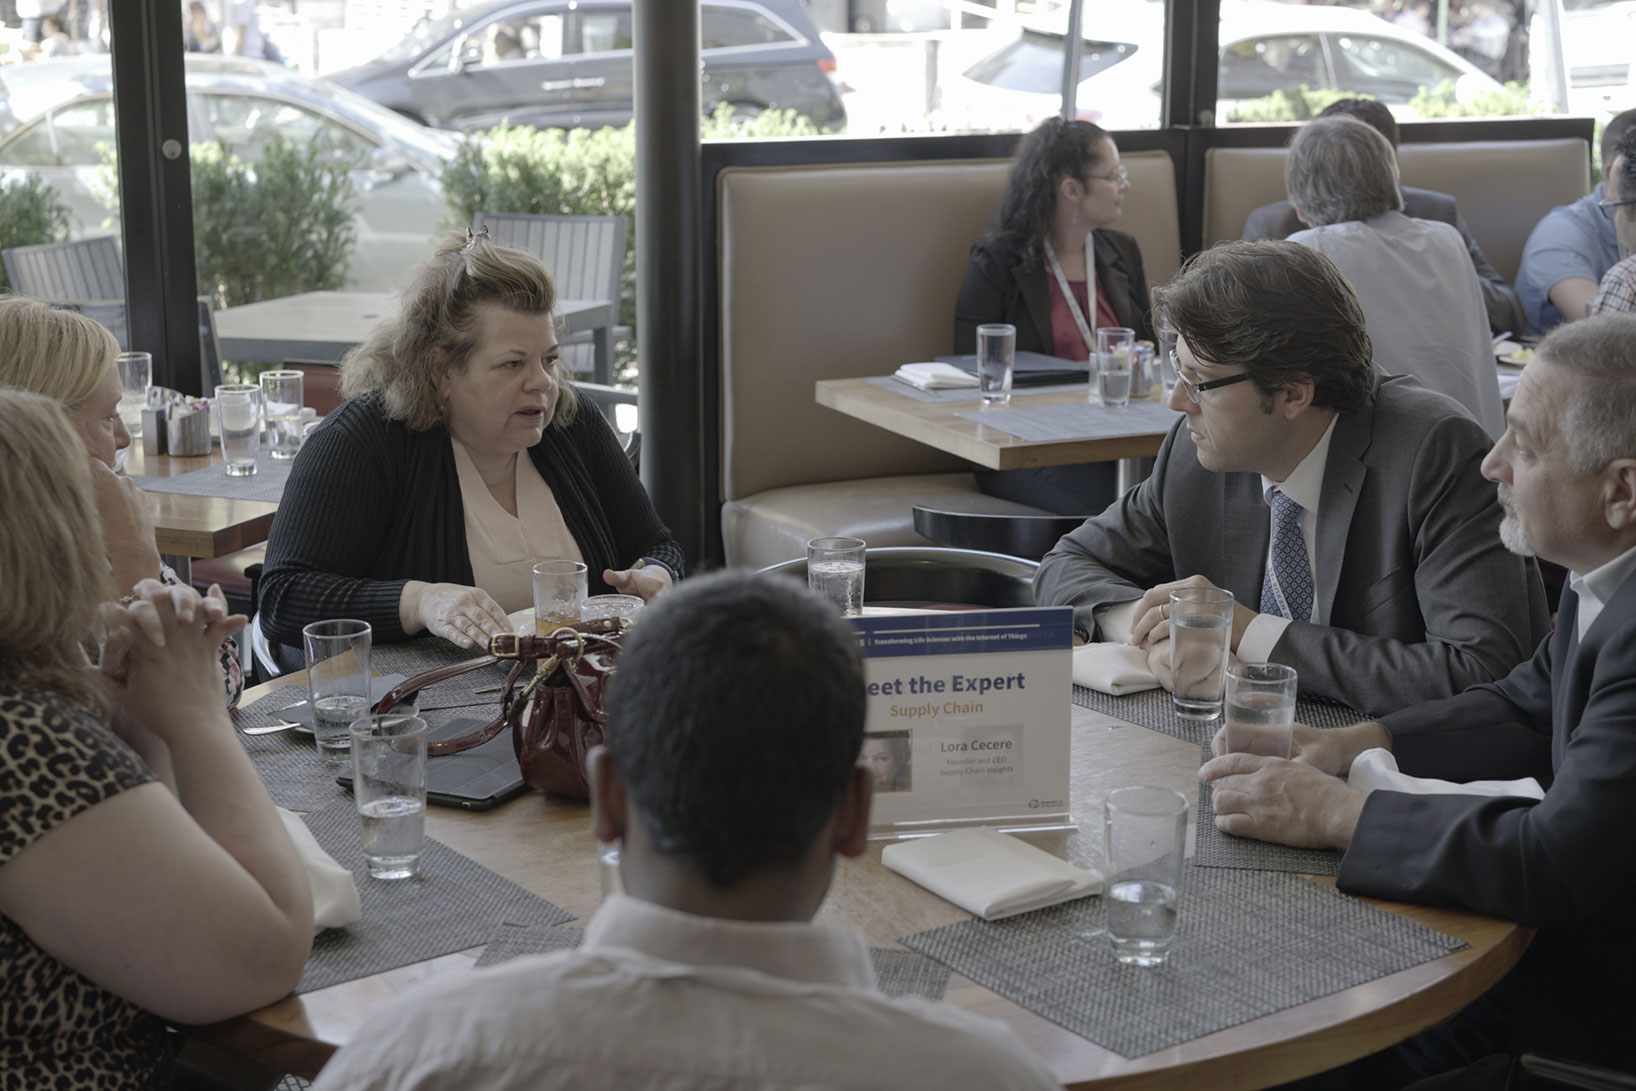 Lora Cecere engages with the other attendees at her table during the Meet the Experts lunch at TraceLink's NEXUS '15.